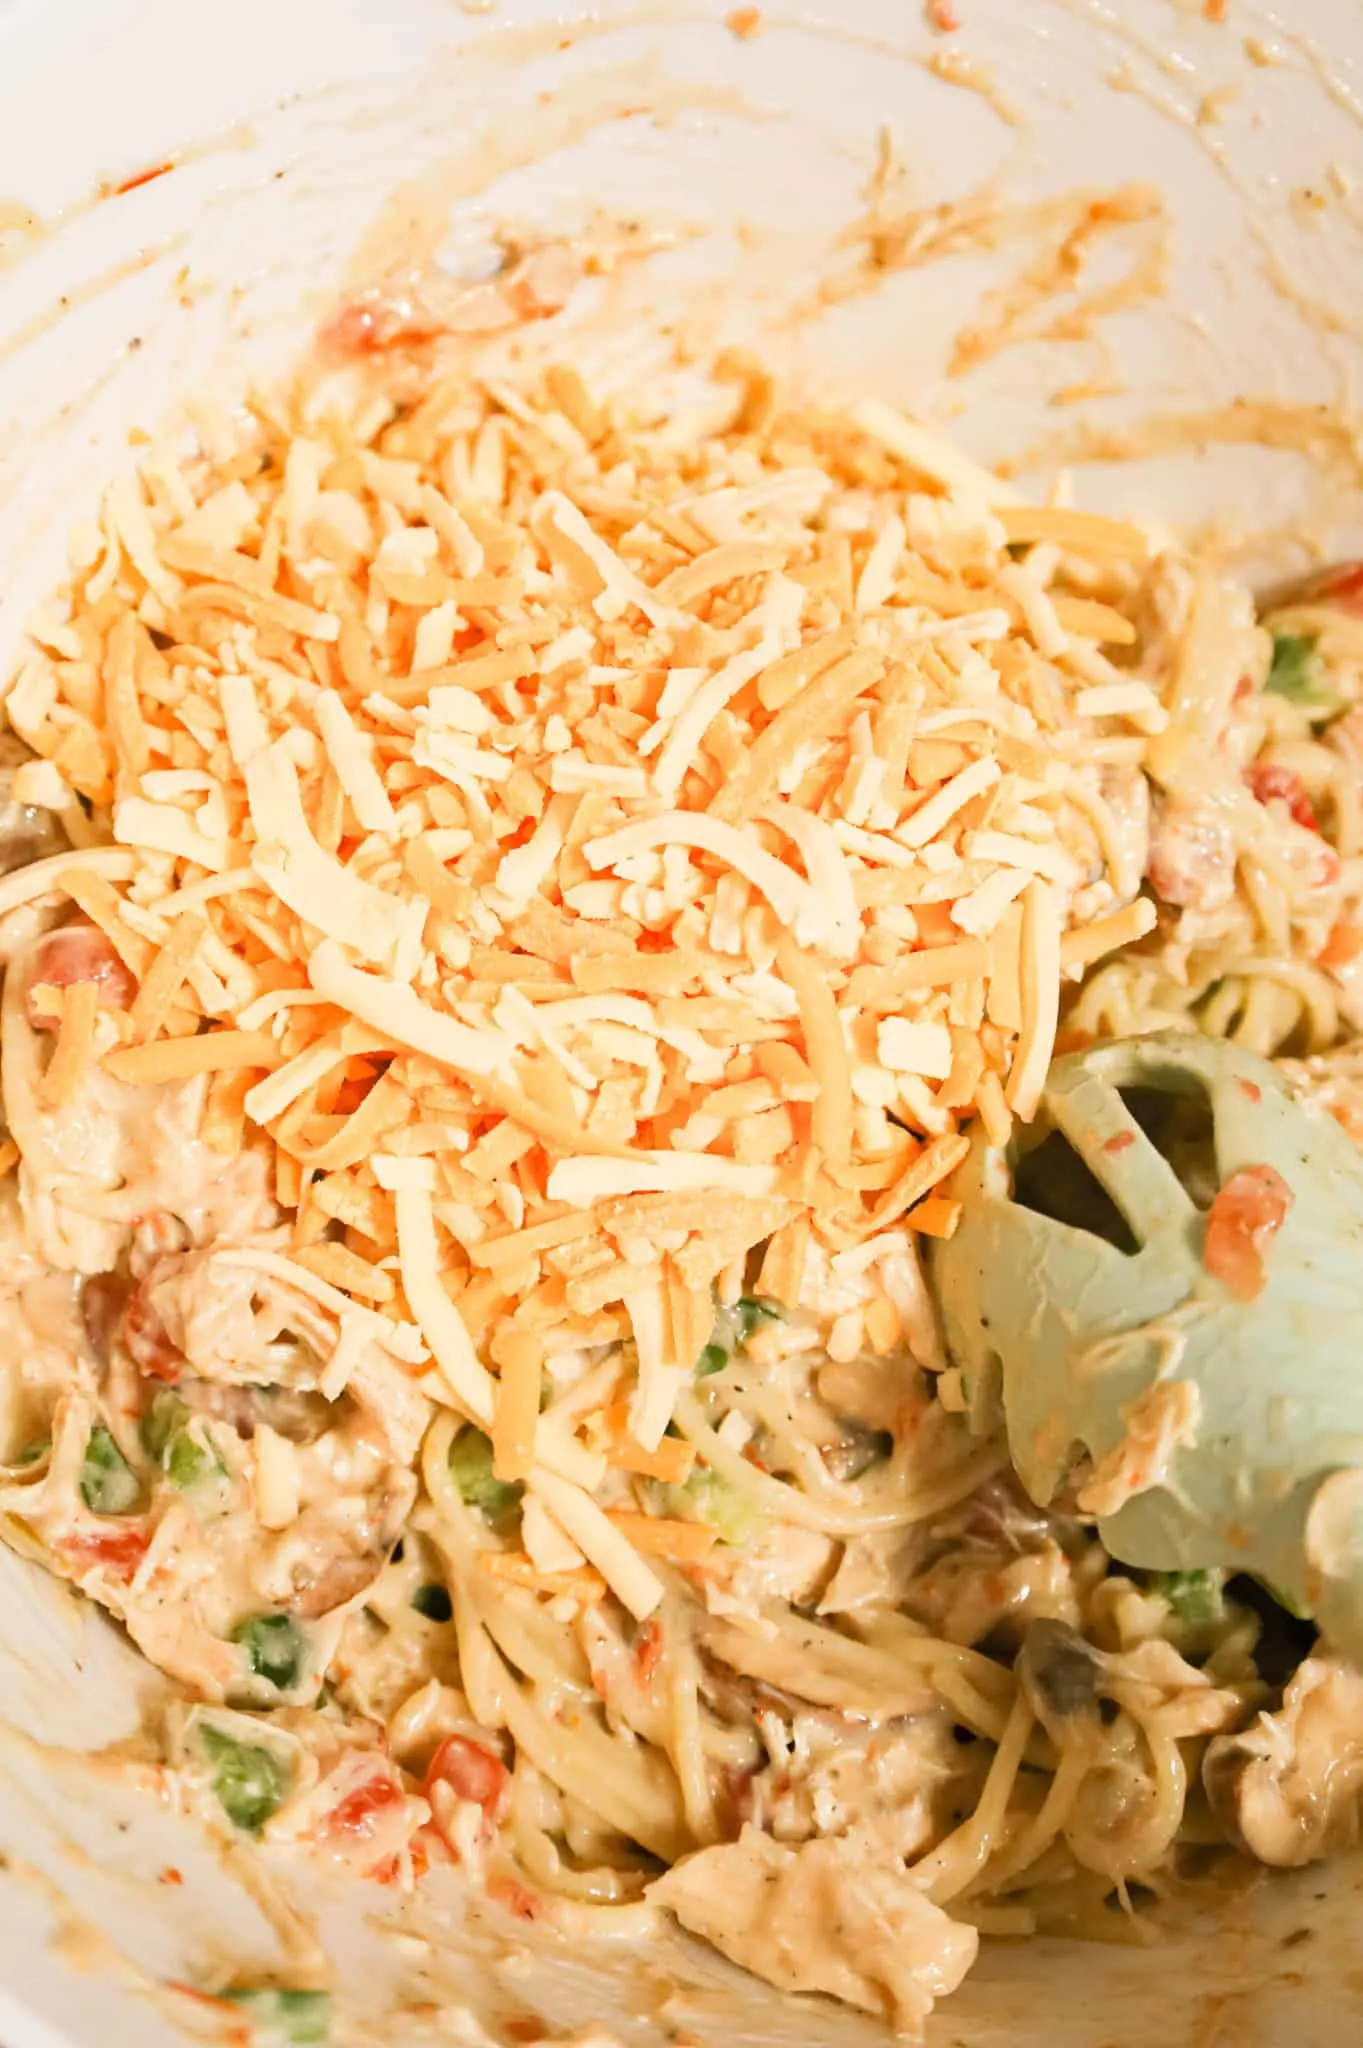 shredded cheese added to mixing bowl with creamy chicken spaghetti mixture